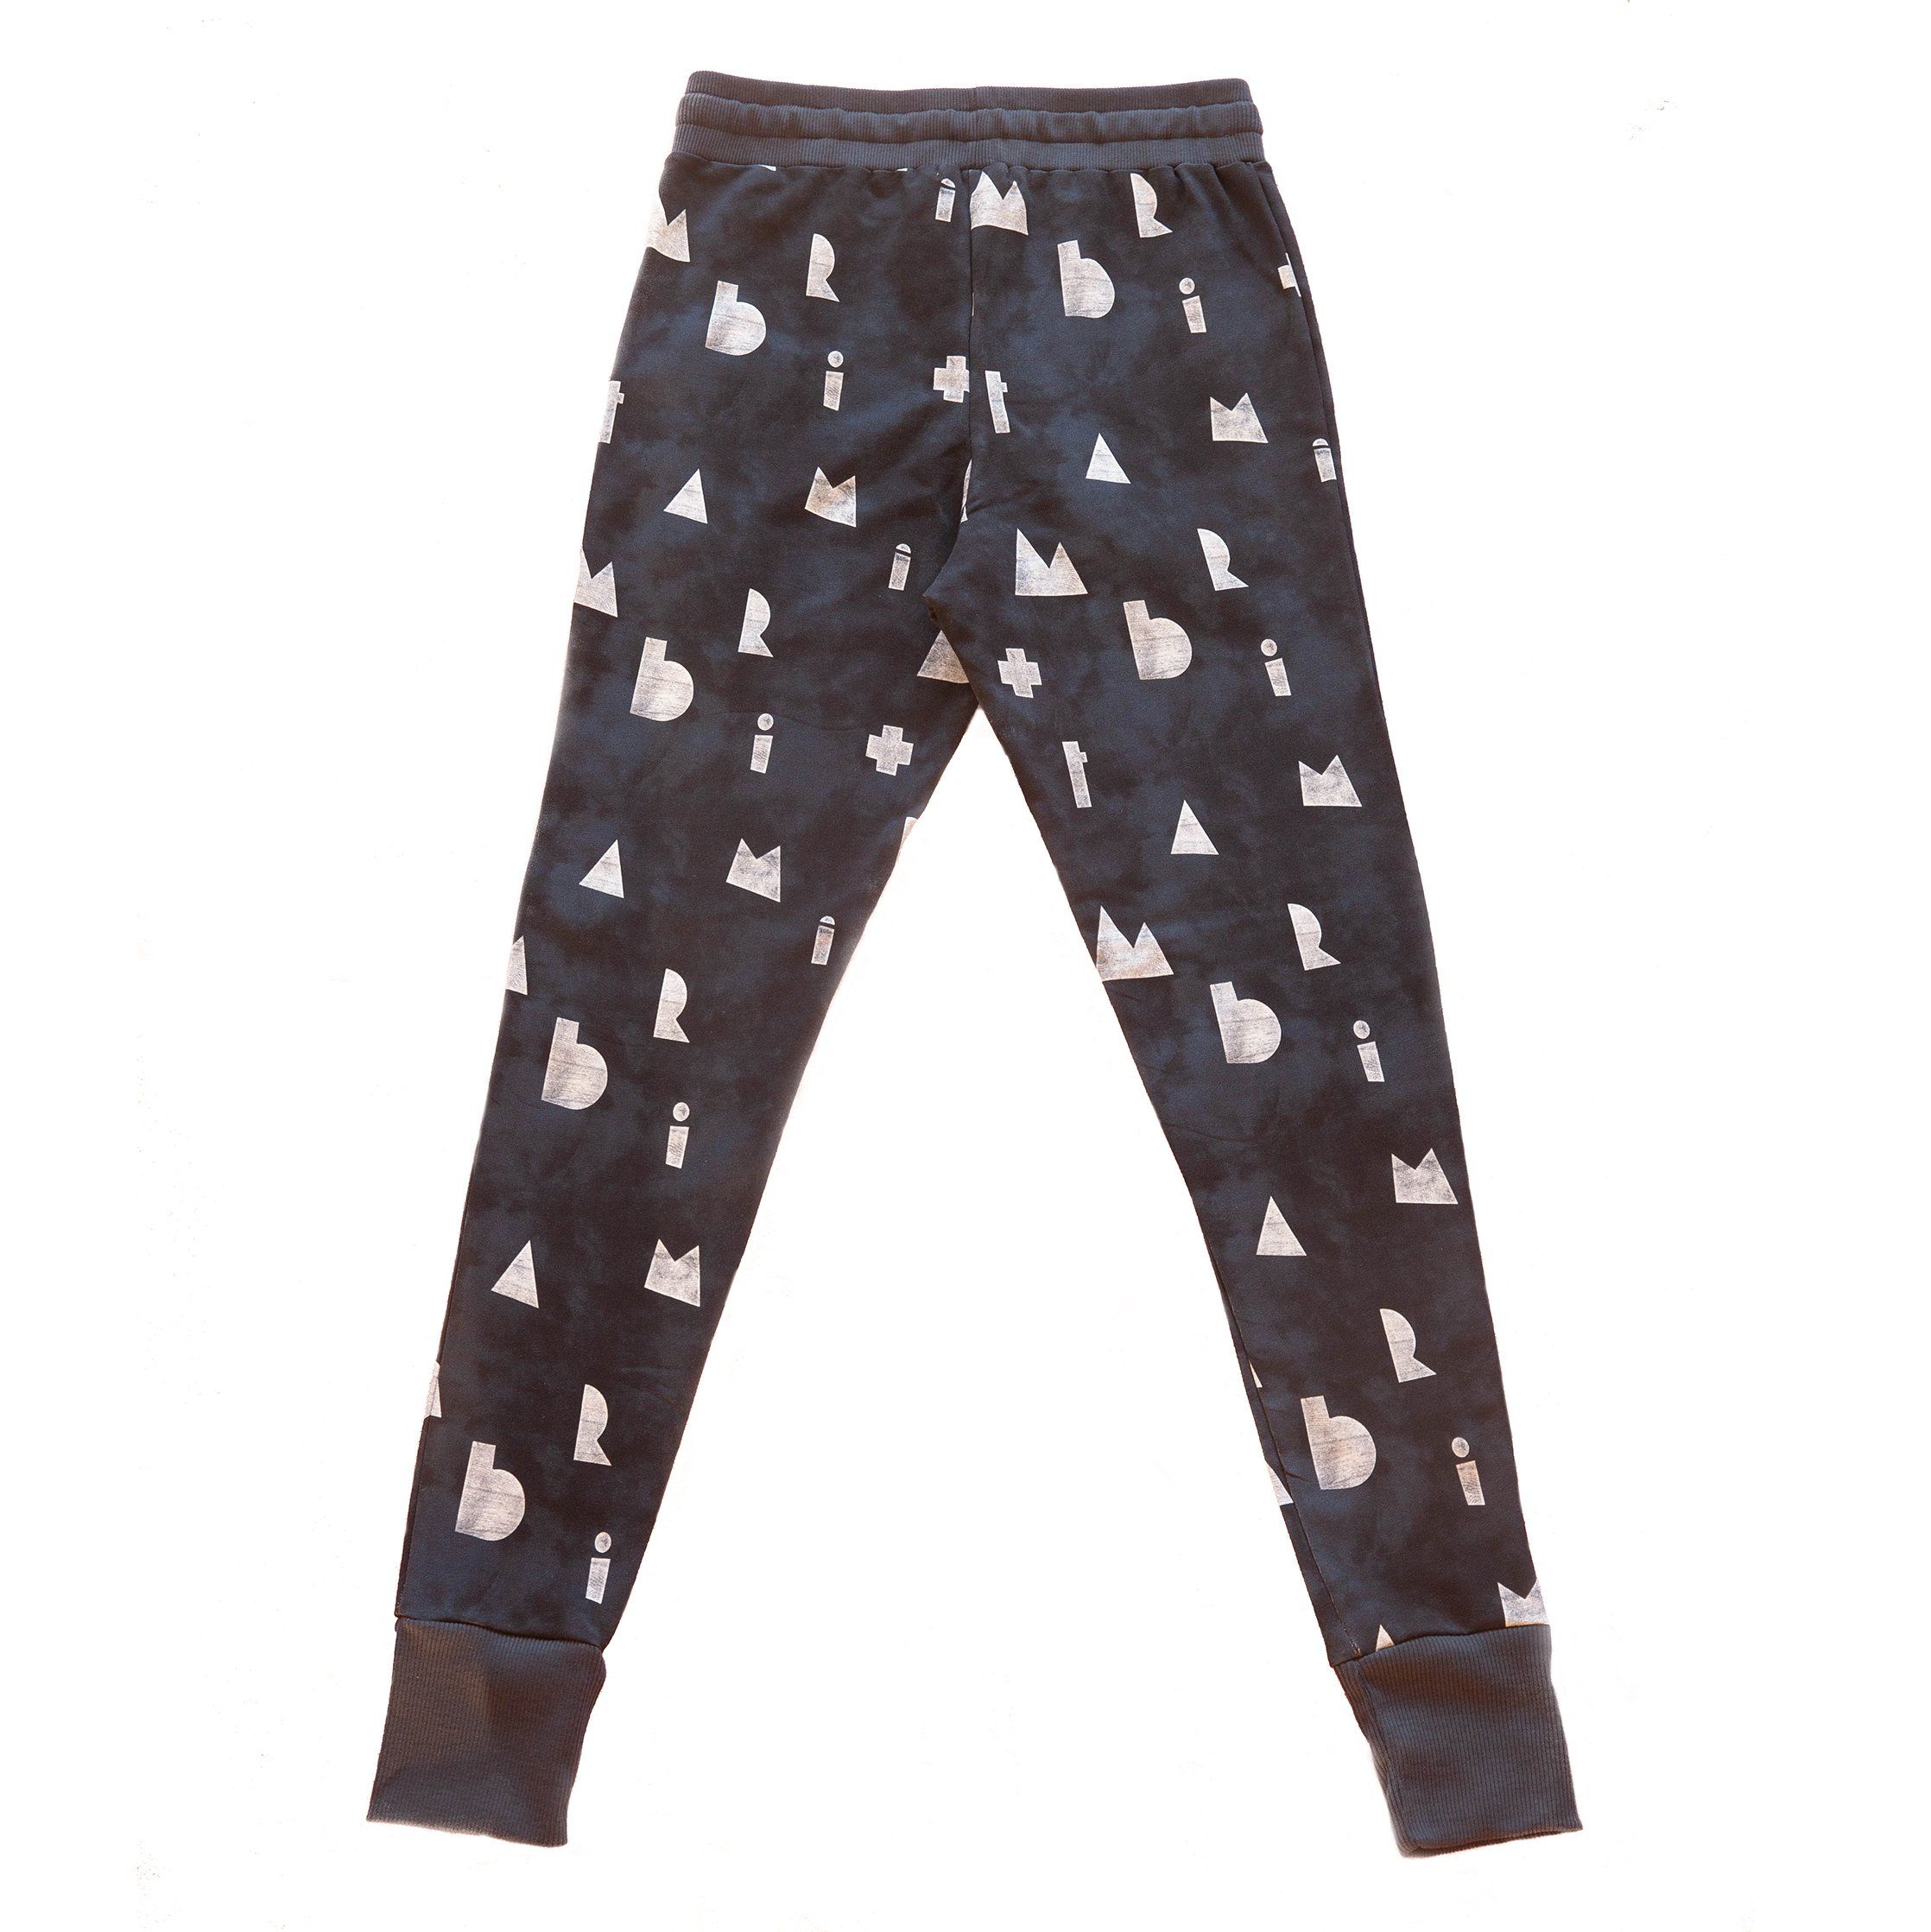 dark casual adult stretch pants with print, organic cotton